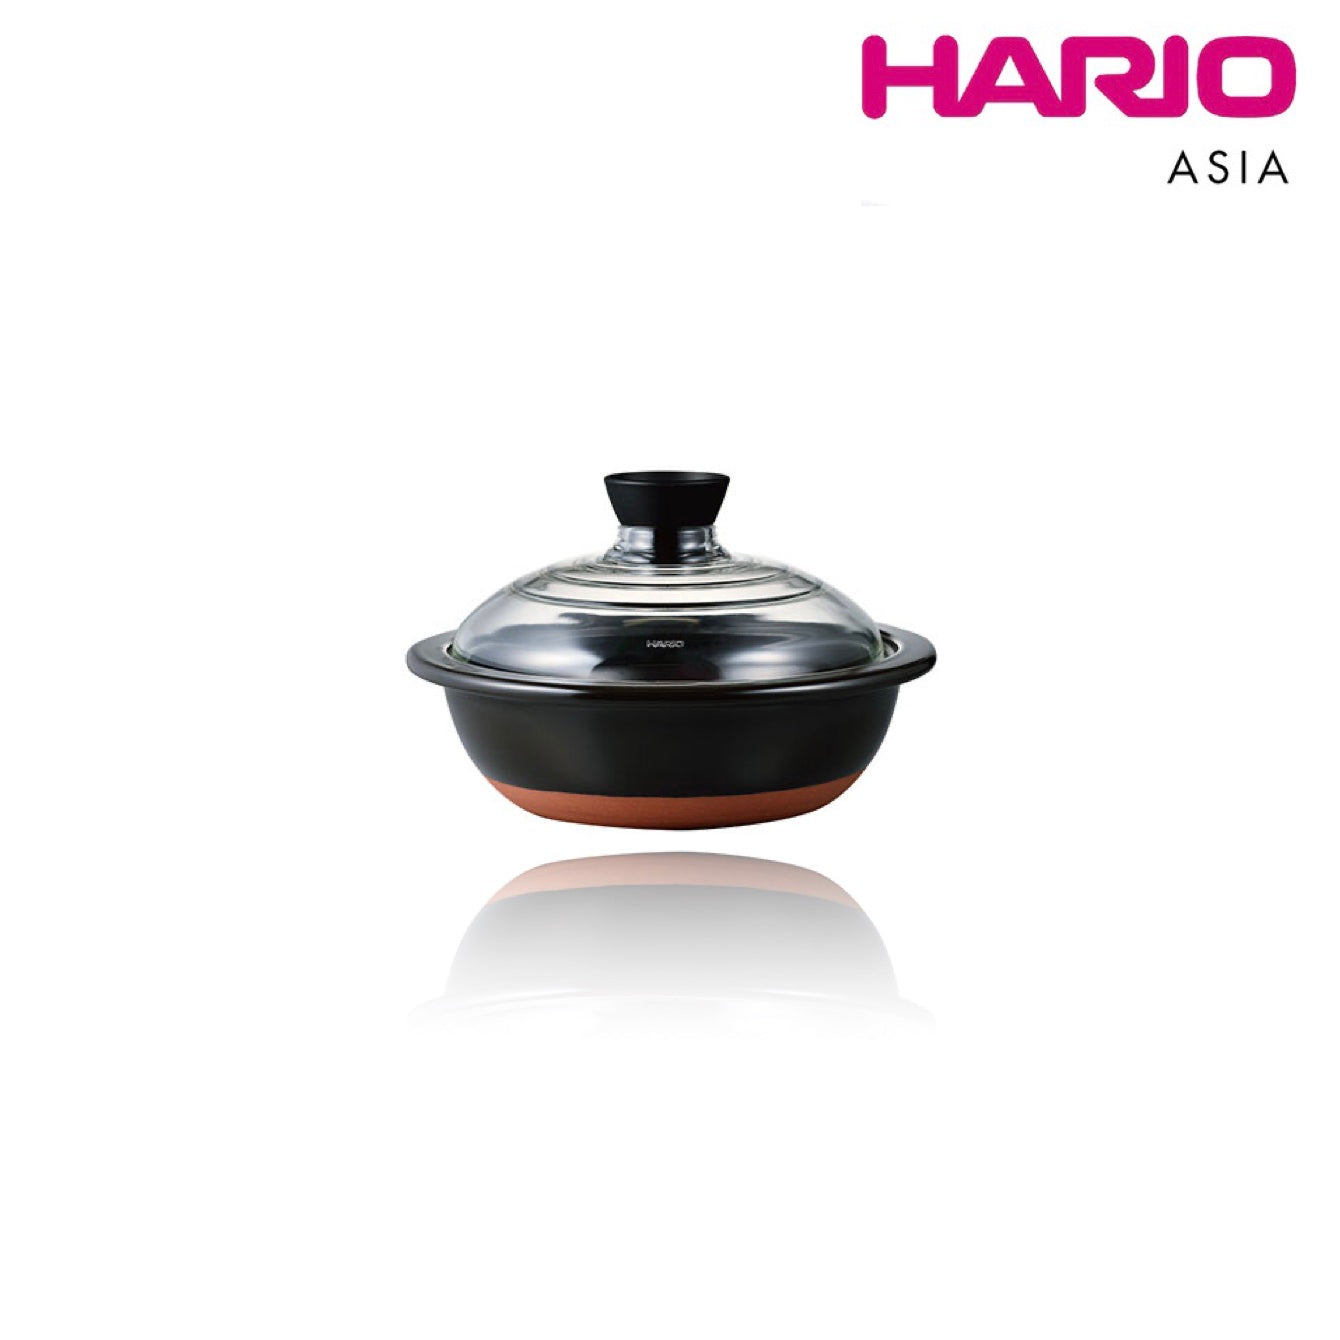 DONABE Glass Lid Cooking Pot